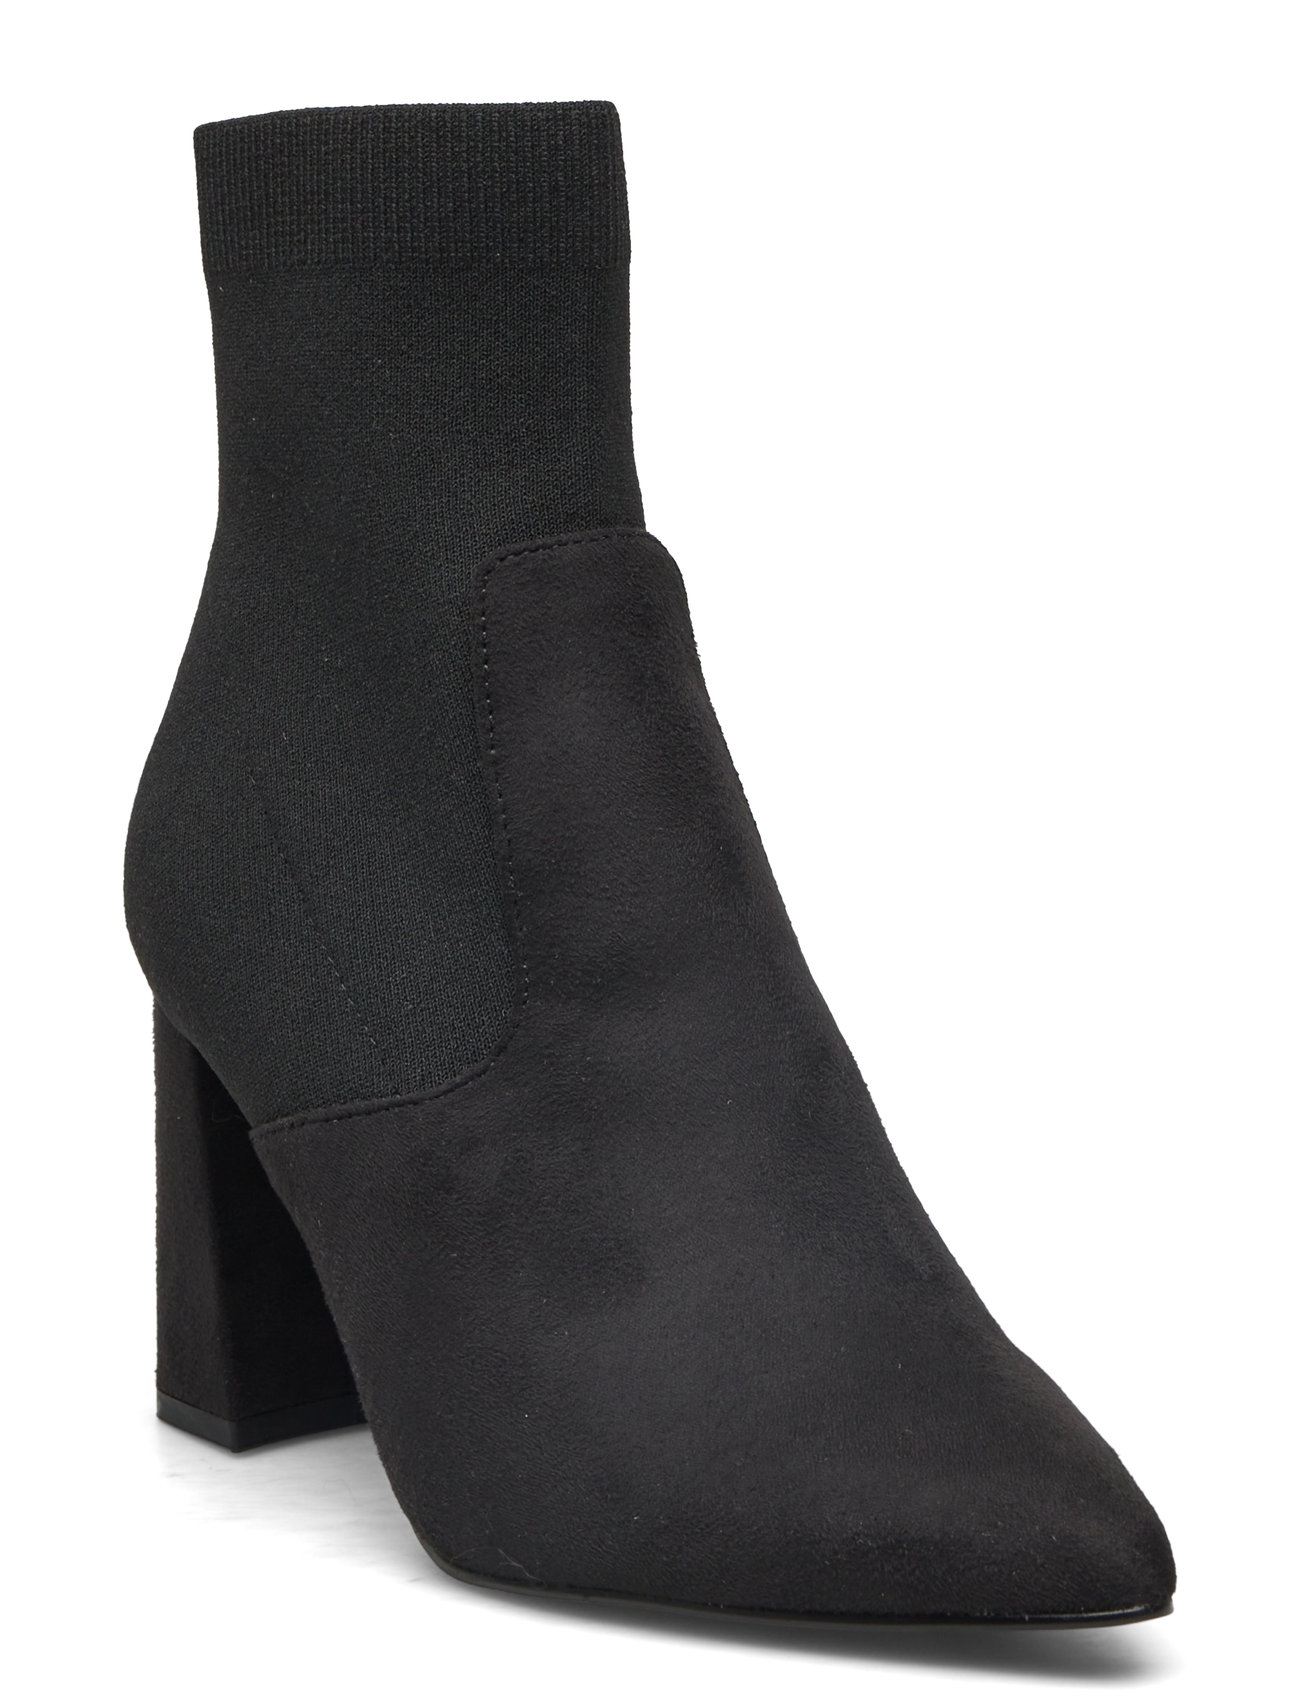 Purify Bootie Shoes Boots Ankle Boots Ankle Boots With Heel Black Steve Madden